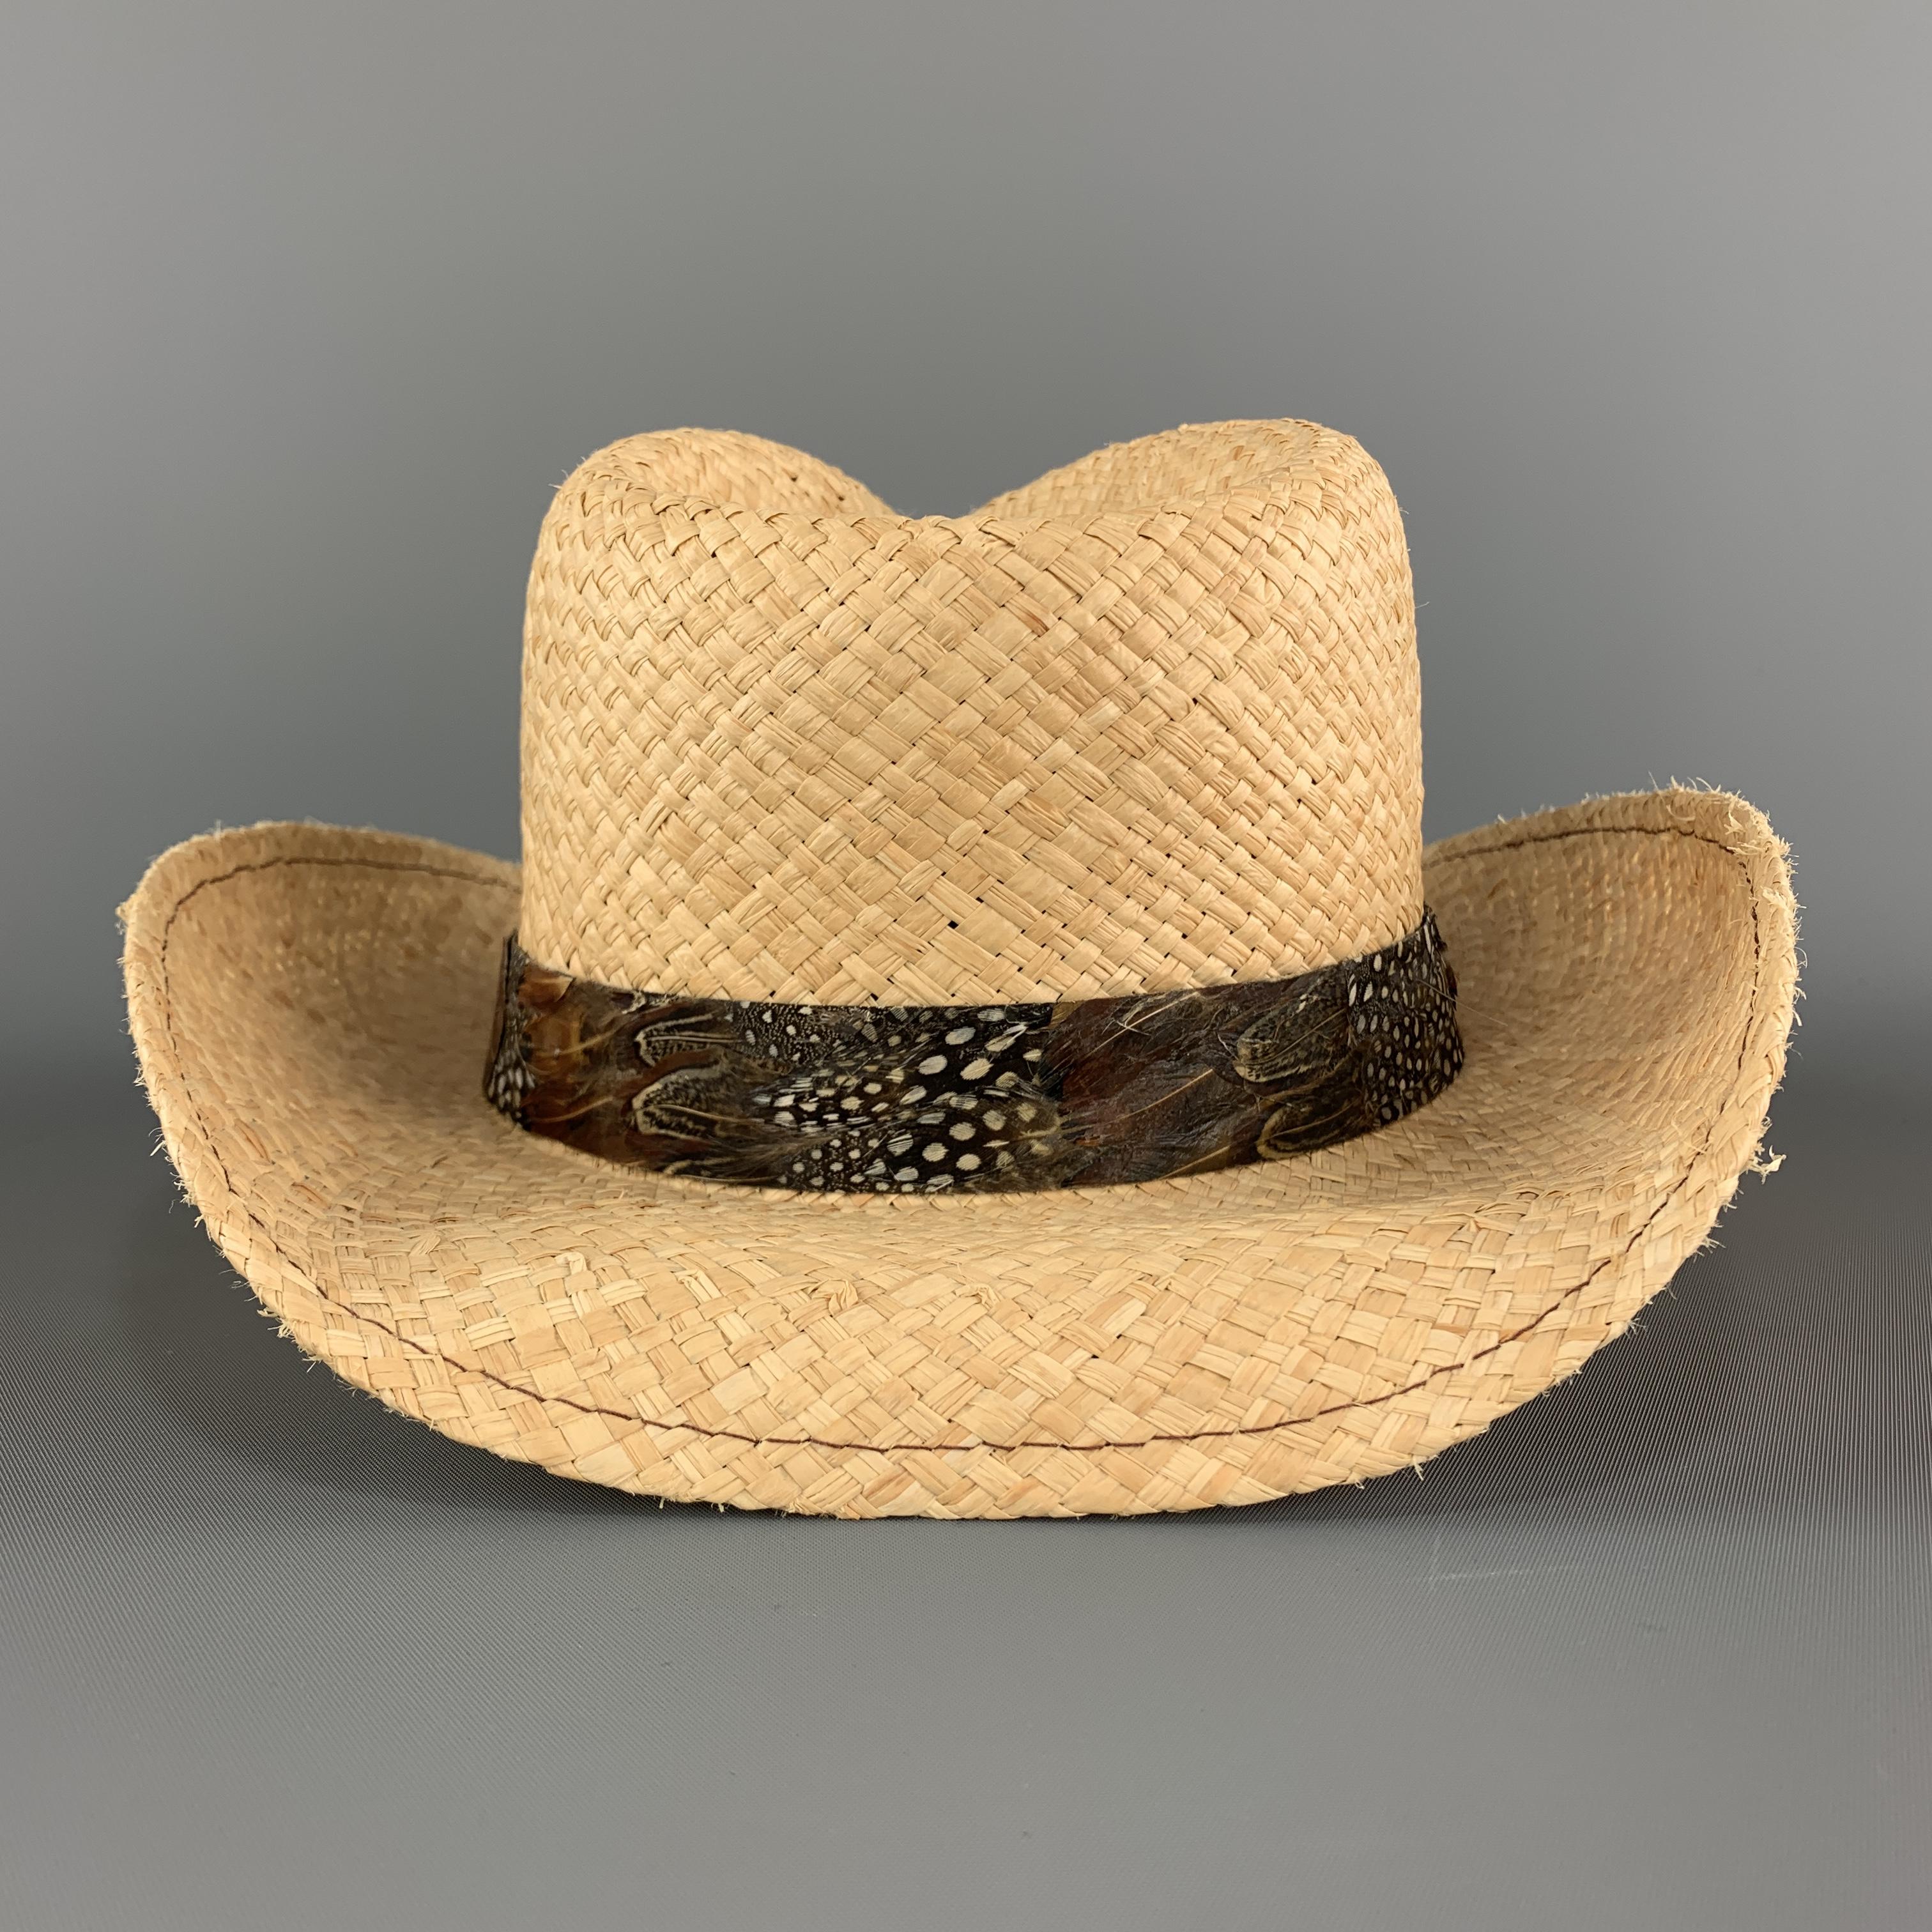 GOORIN BROTHERS cowboy hat comes in woven straw with feather stripe band. Made in USA.

Excellent Pre-Owned Condition.
Marked: Large

Measurements:

Opening: 23.75 in.
Brim: 3 in.
Height: 4.75 in.